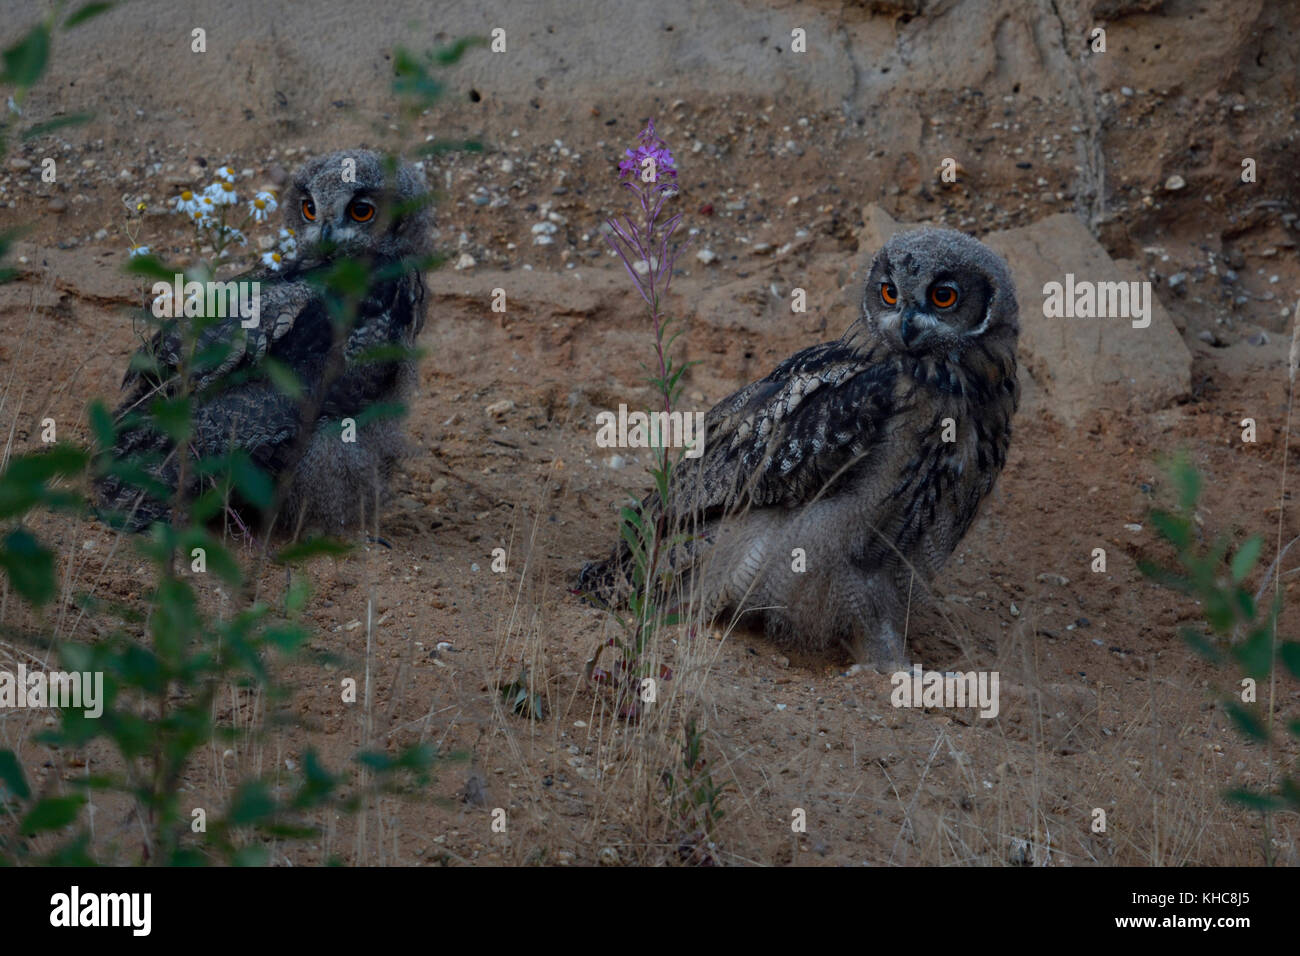 Eurasian Eagle Owls ( Bubo bubo ), young chicks, sitting next to each other in the slope of a gravel pit, at dusk, wildlife, Europe. Stock Photo